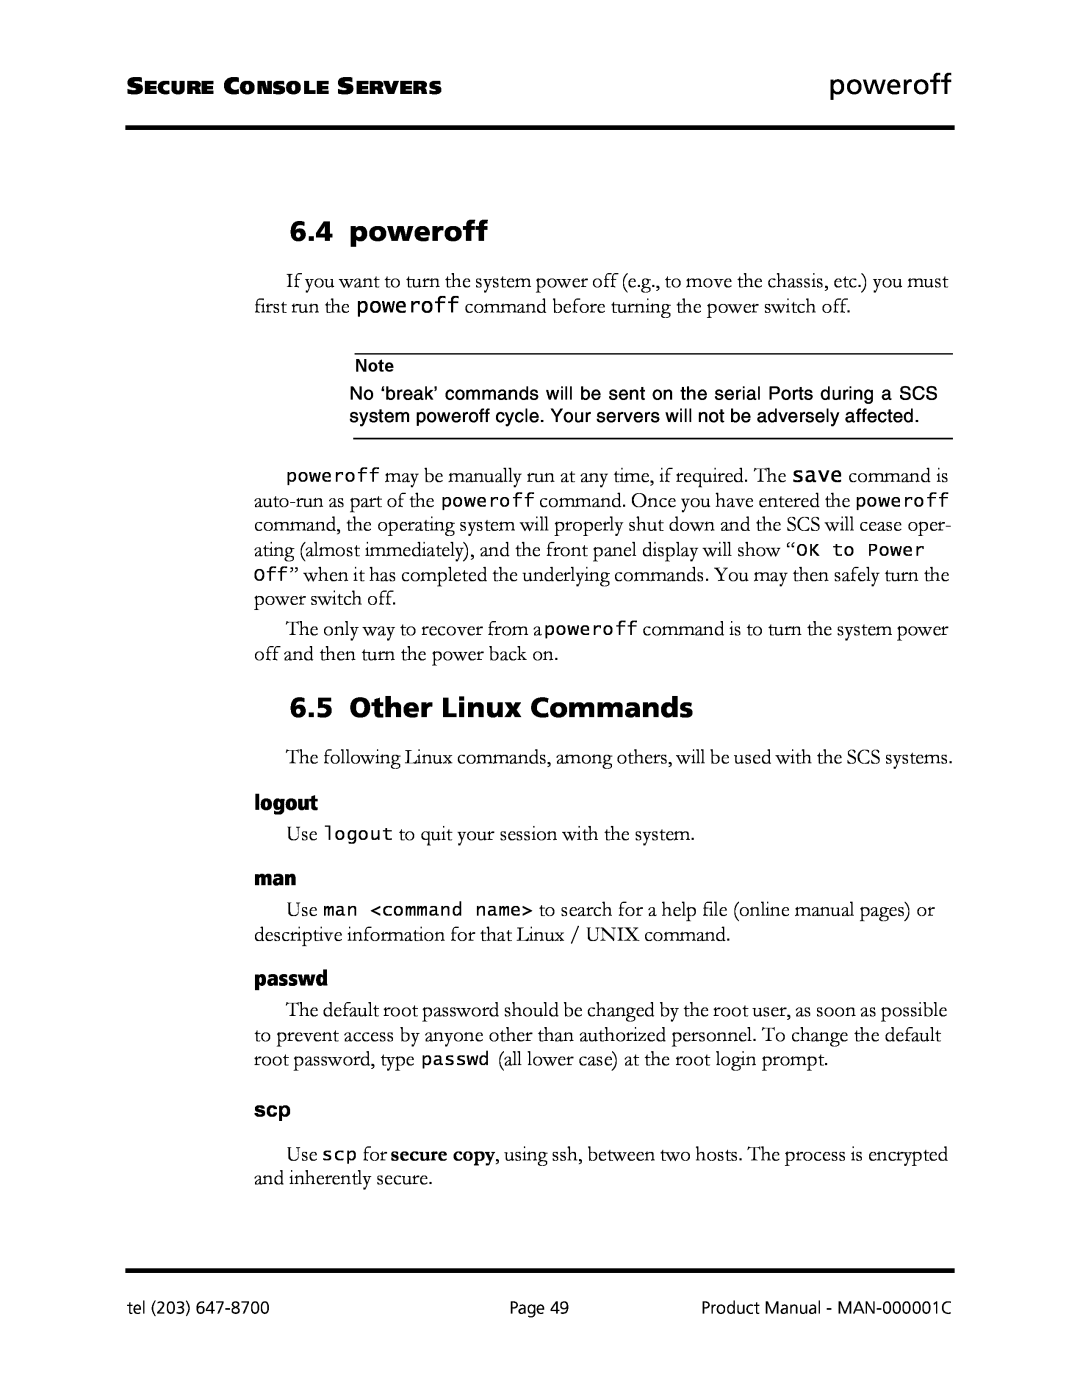 Logical Solutions SCS-R manual poweroff, Other Linux Commands, logout, passwd 